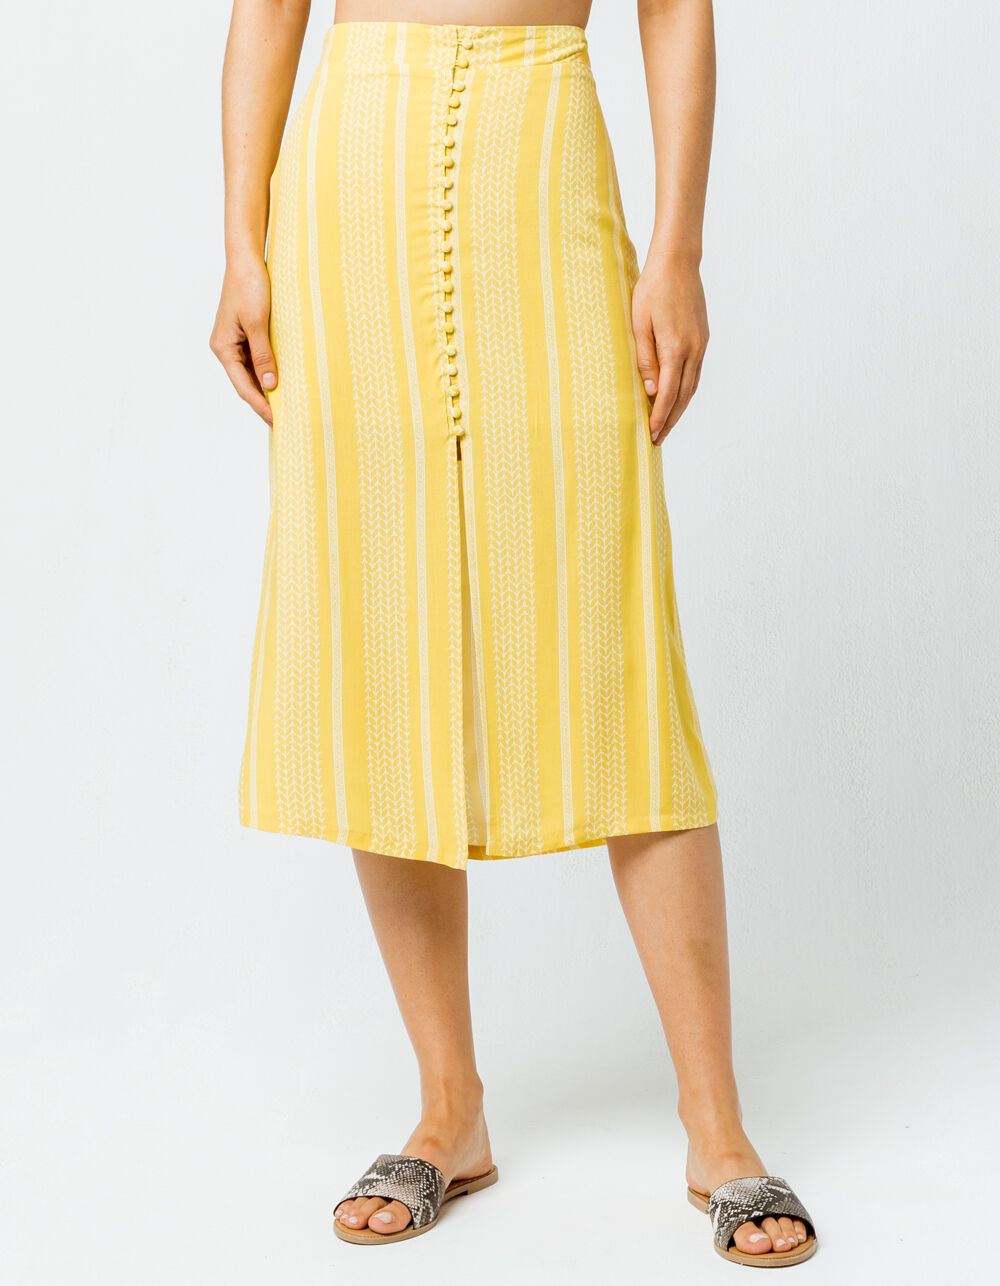 SKY AND SPARROW Button Front Midi Skirt - YELLOW COMBO | Tillys